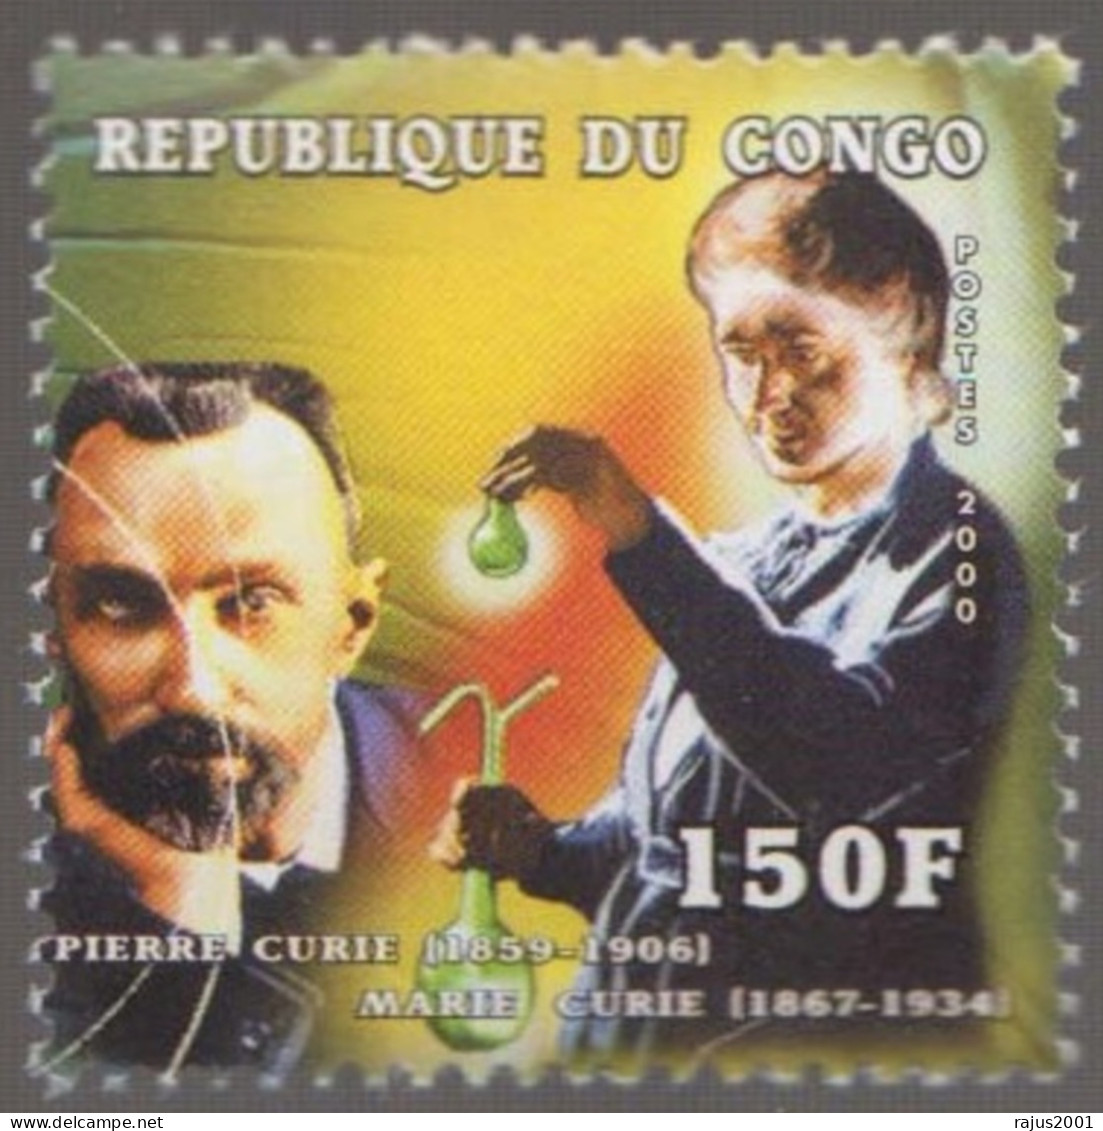 Pierre And Marie Curie, Discovery Of Radium And Polonium Nobel Prize Cancer Disease Chemistry Physics MNH Congo - Química